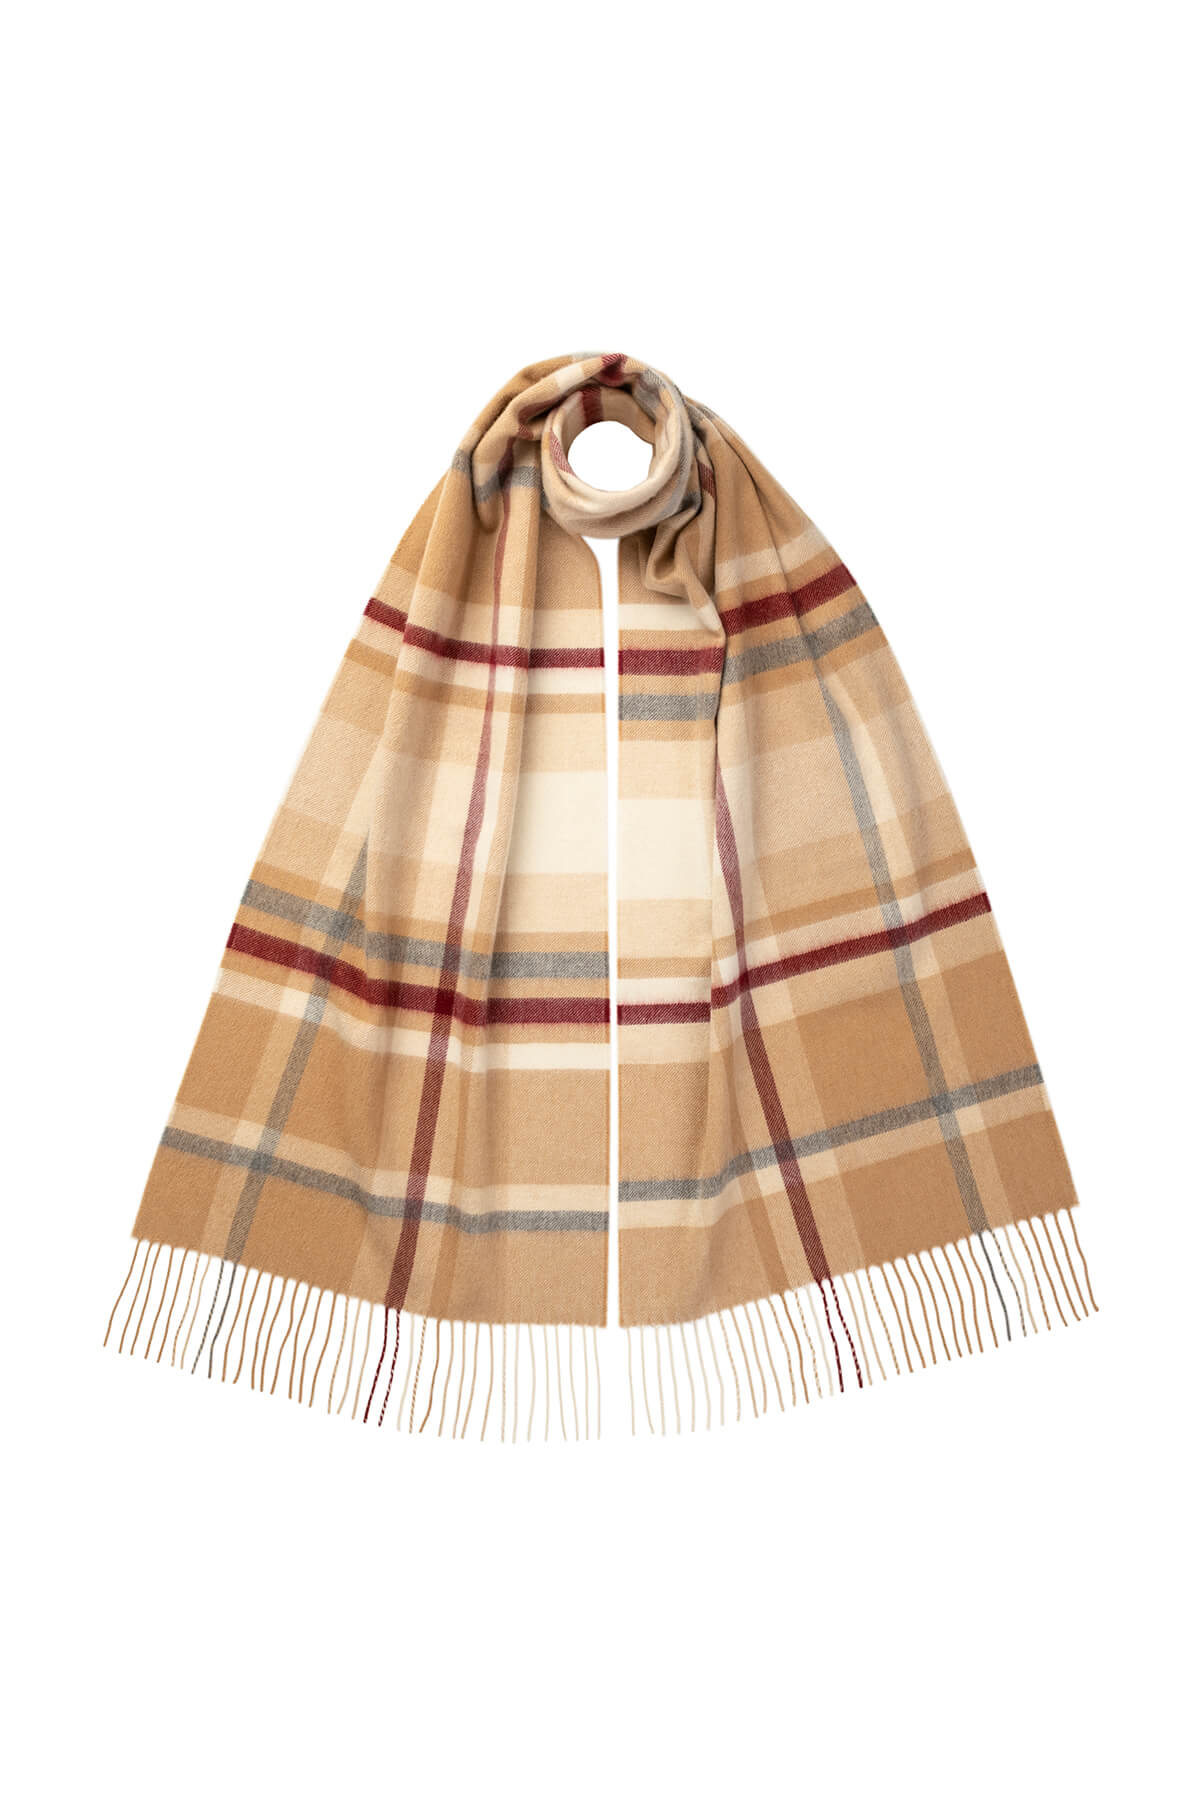 Johnstons of Elgin Cashmere Flannel Check Scarf in Camel on a white background WA000057RU7324ONE